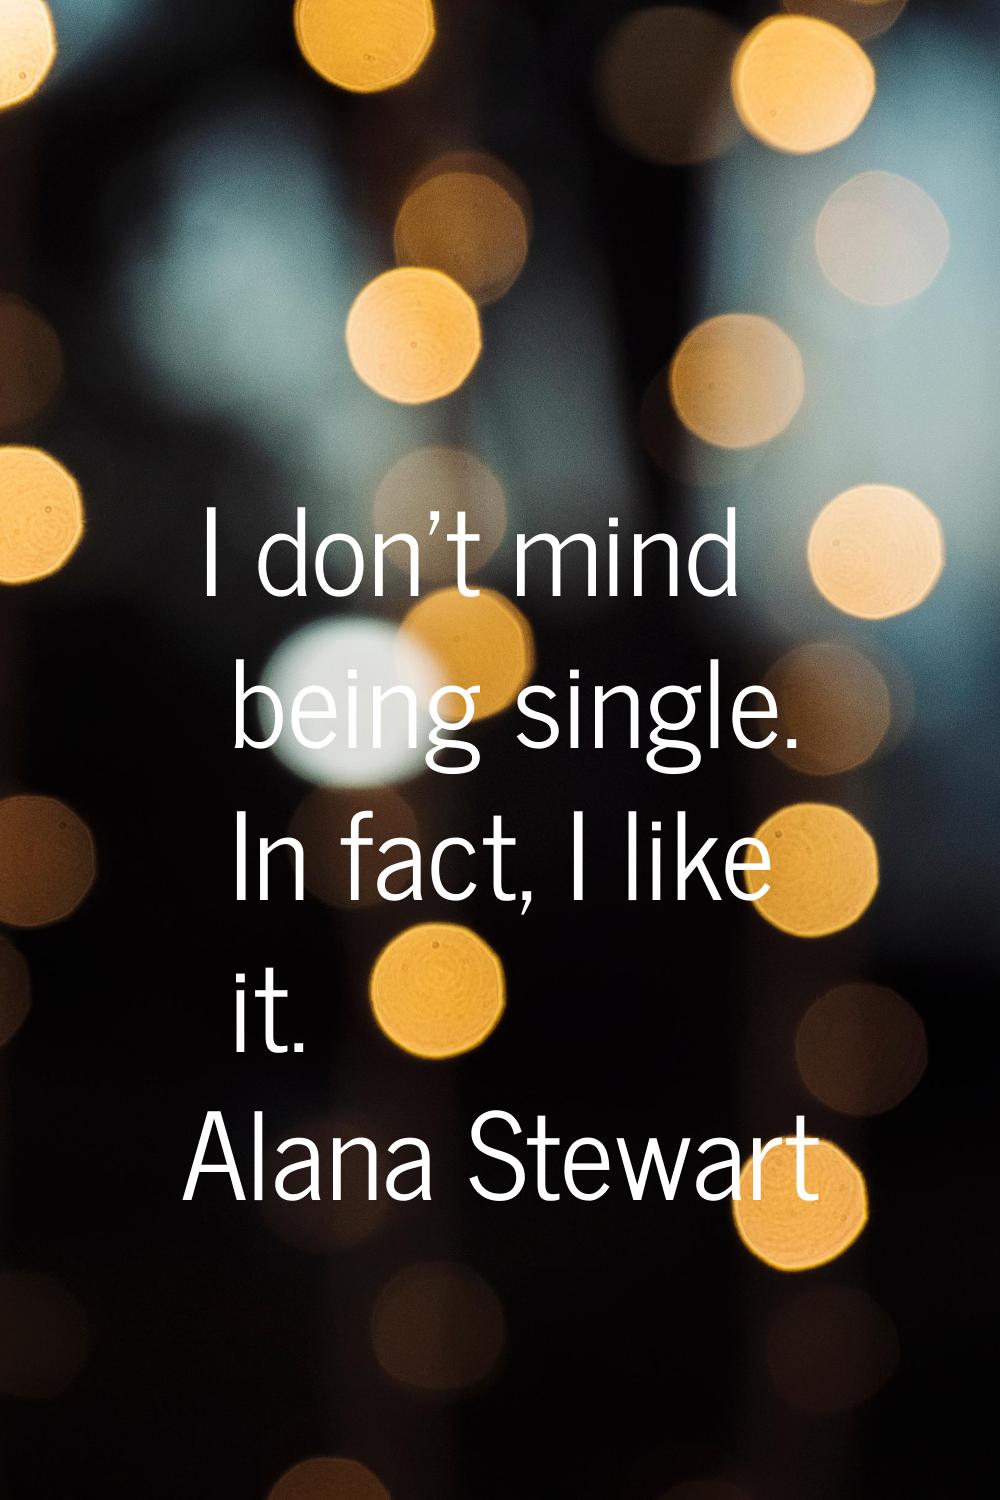 I don't mind being single. In fact, I like it.